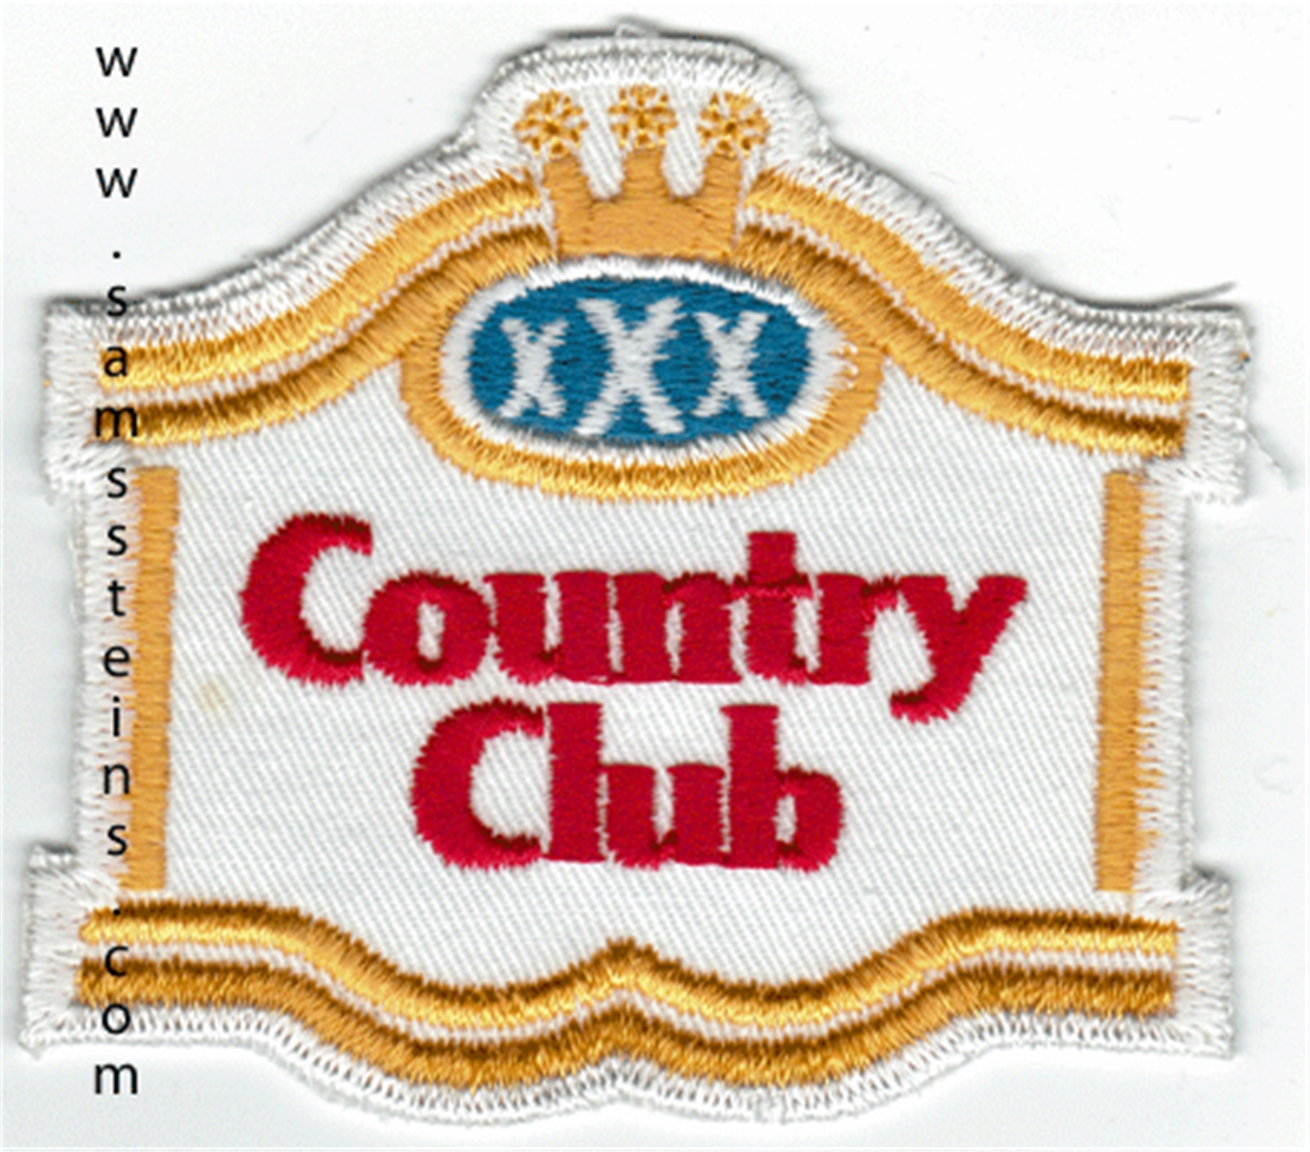 Country Club XXX Beer Patch